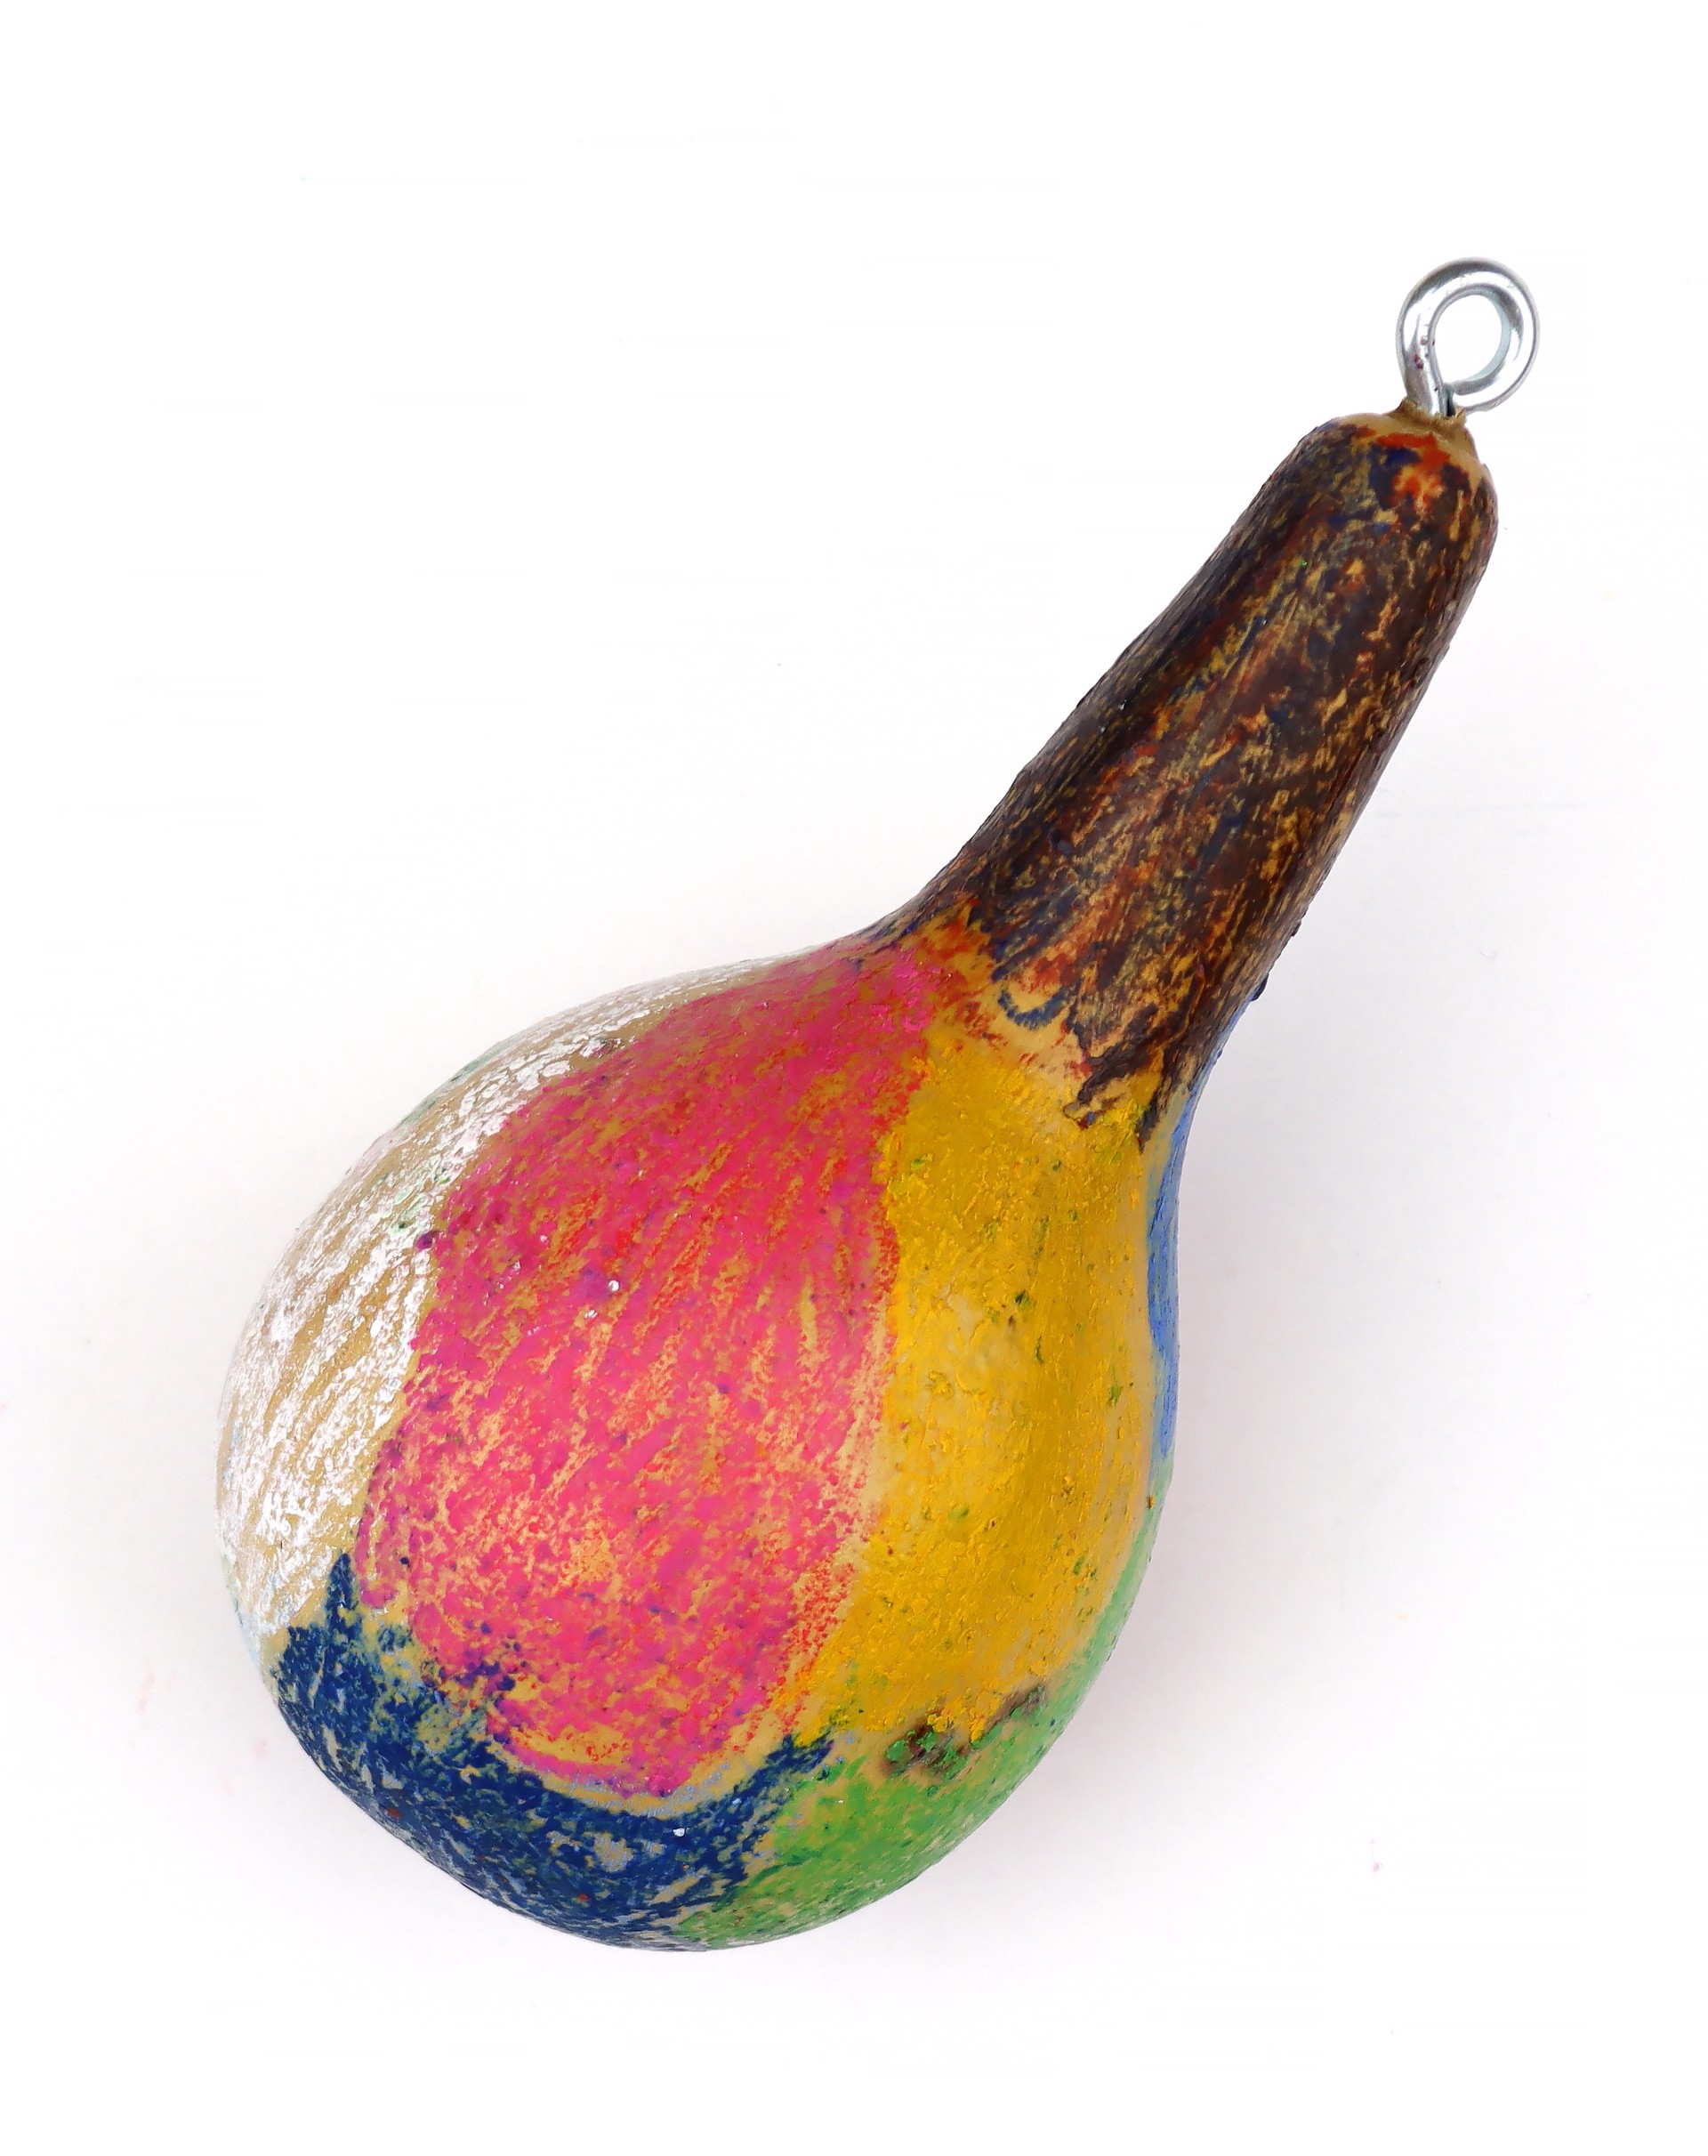 Patchwork (gourd ornament)  by Maurice Barnes